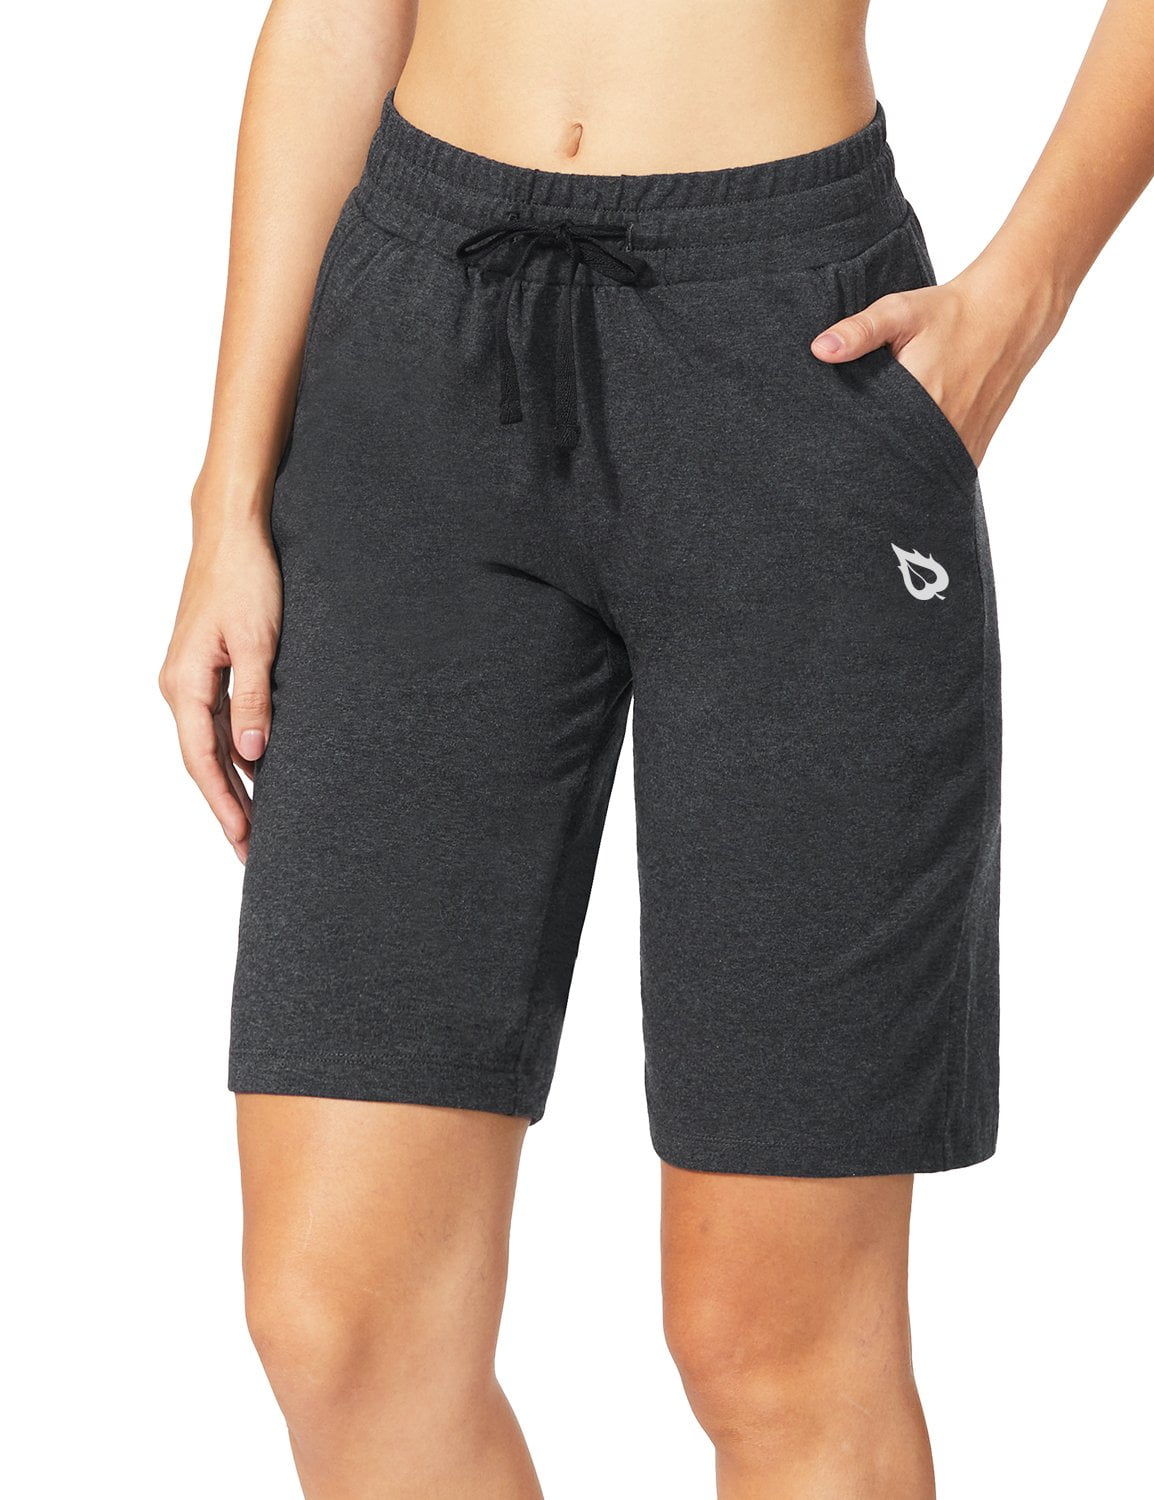 BALEAF Womens 5 Activewear Shorts with Pockets Yoga Casual Workout Running Gym Sports Lounge Bermuda Exercise Athletic 